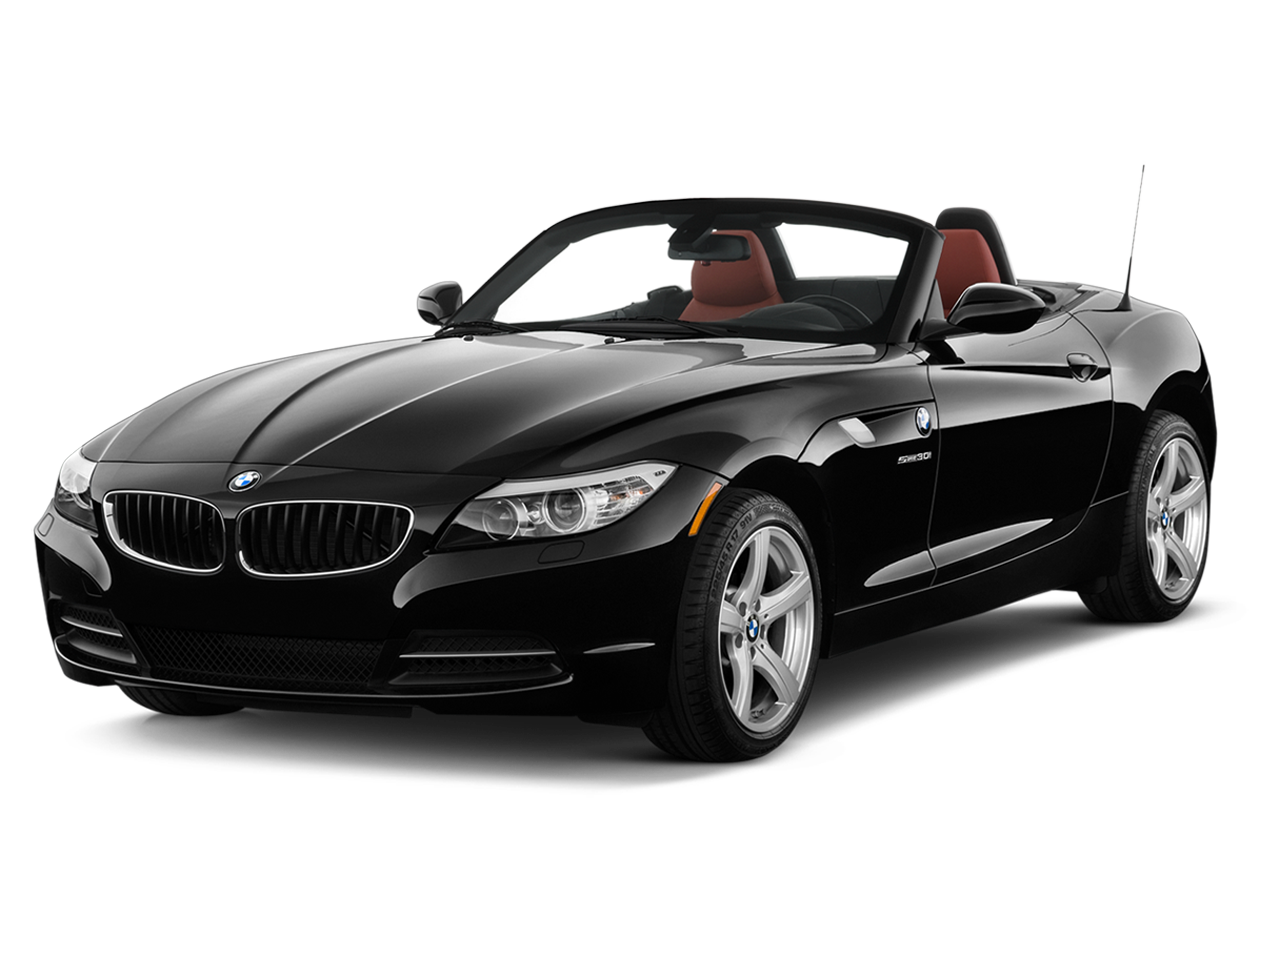 2011 BMW Z4 Prices, Reviews, and Photos - MotorTrend